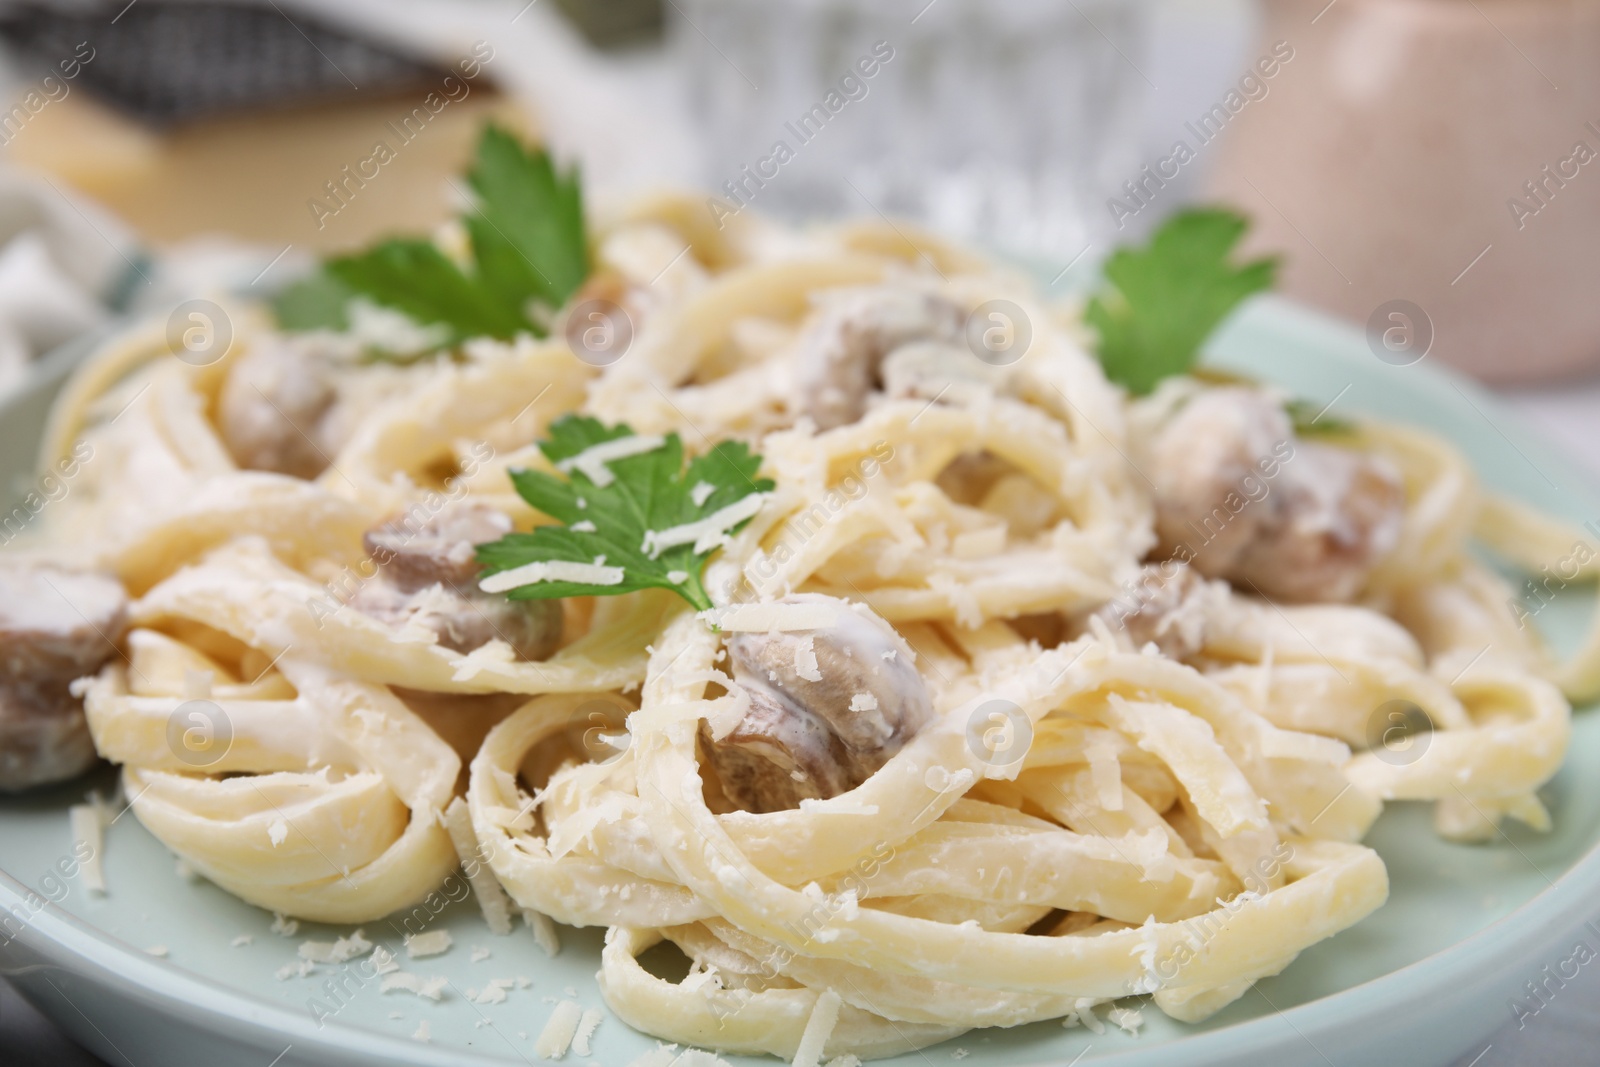 Photo of Delicious pasta with mushrooms and cheese on plate, closeup